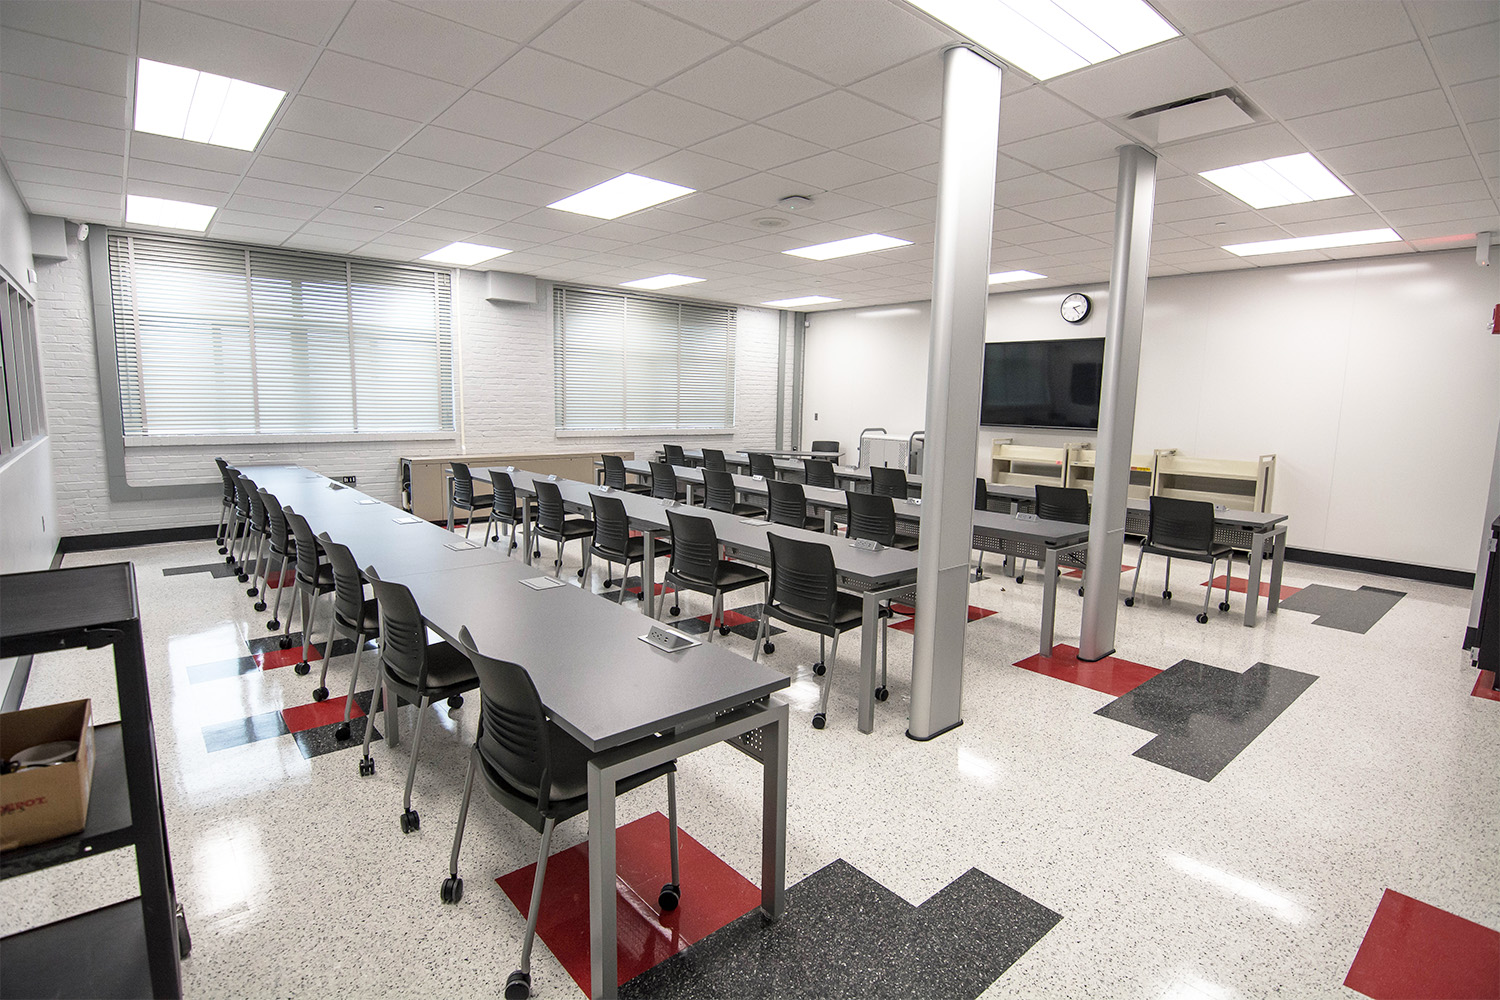 Cyber security classroom with desks, chairs and power supply outlets in the desks